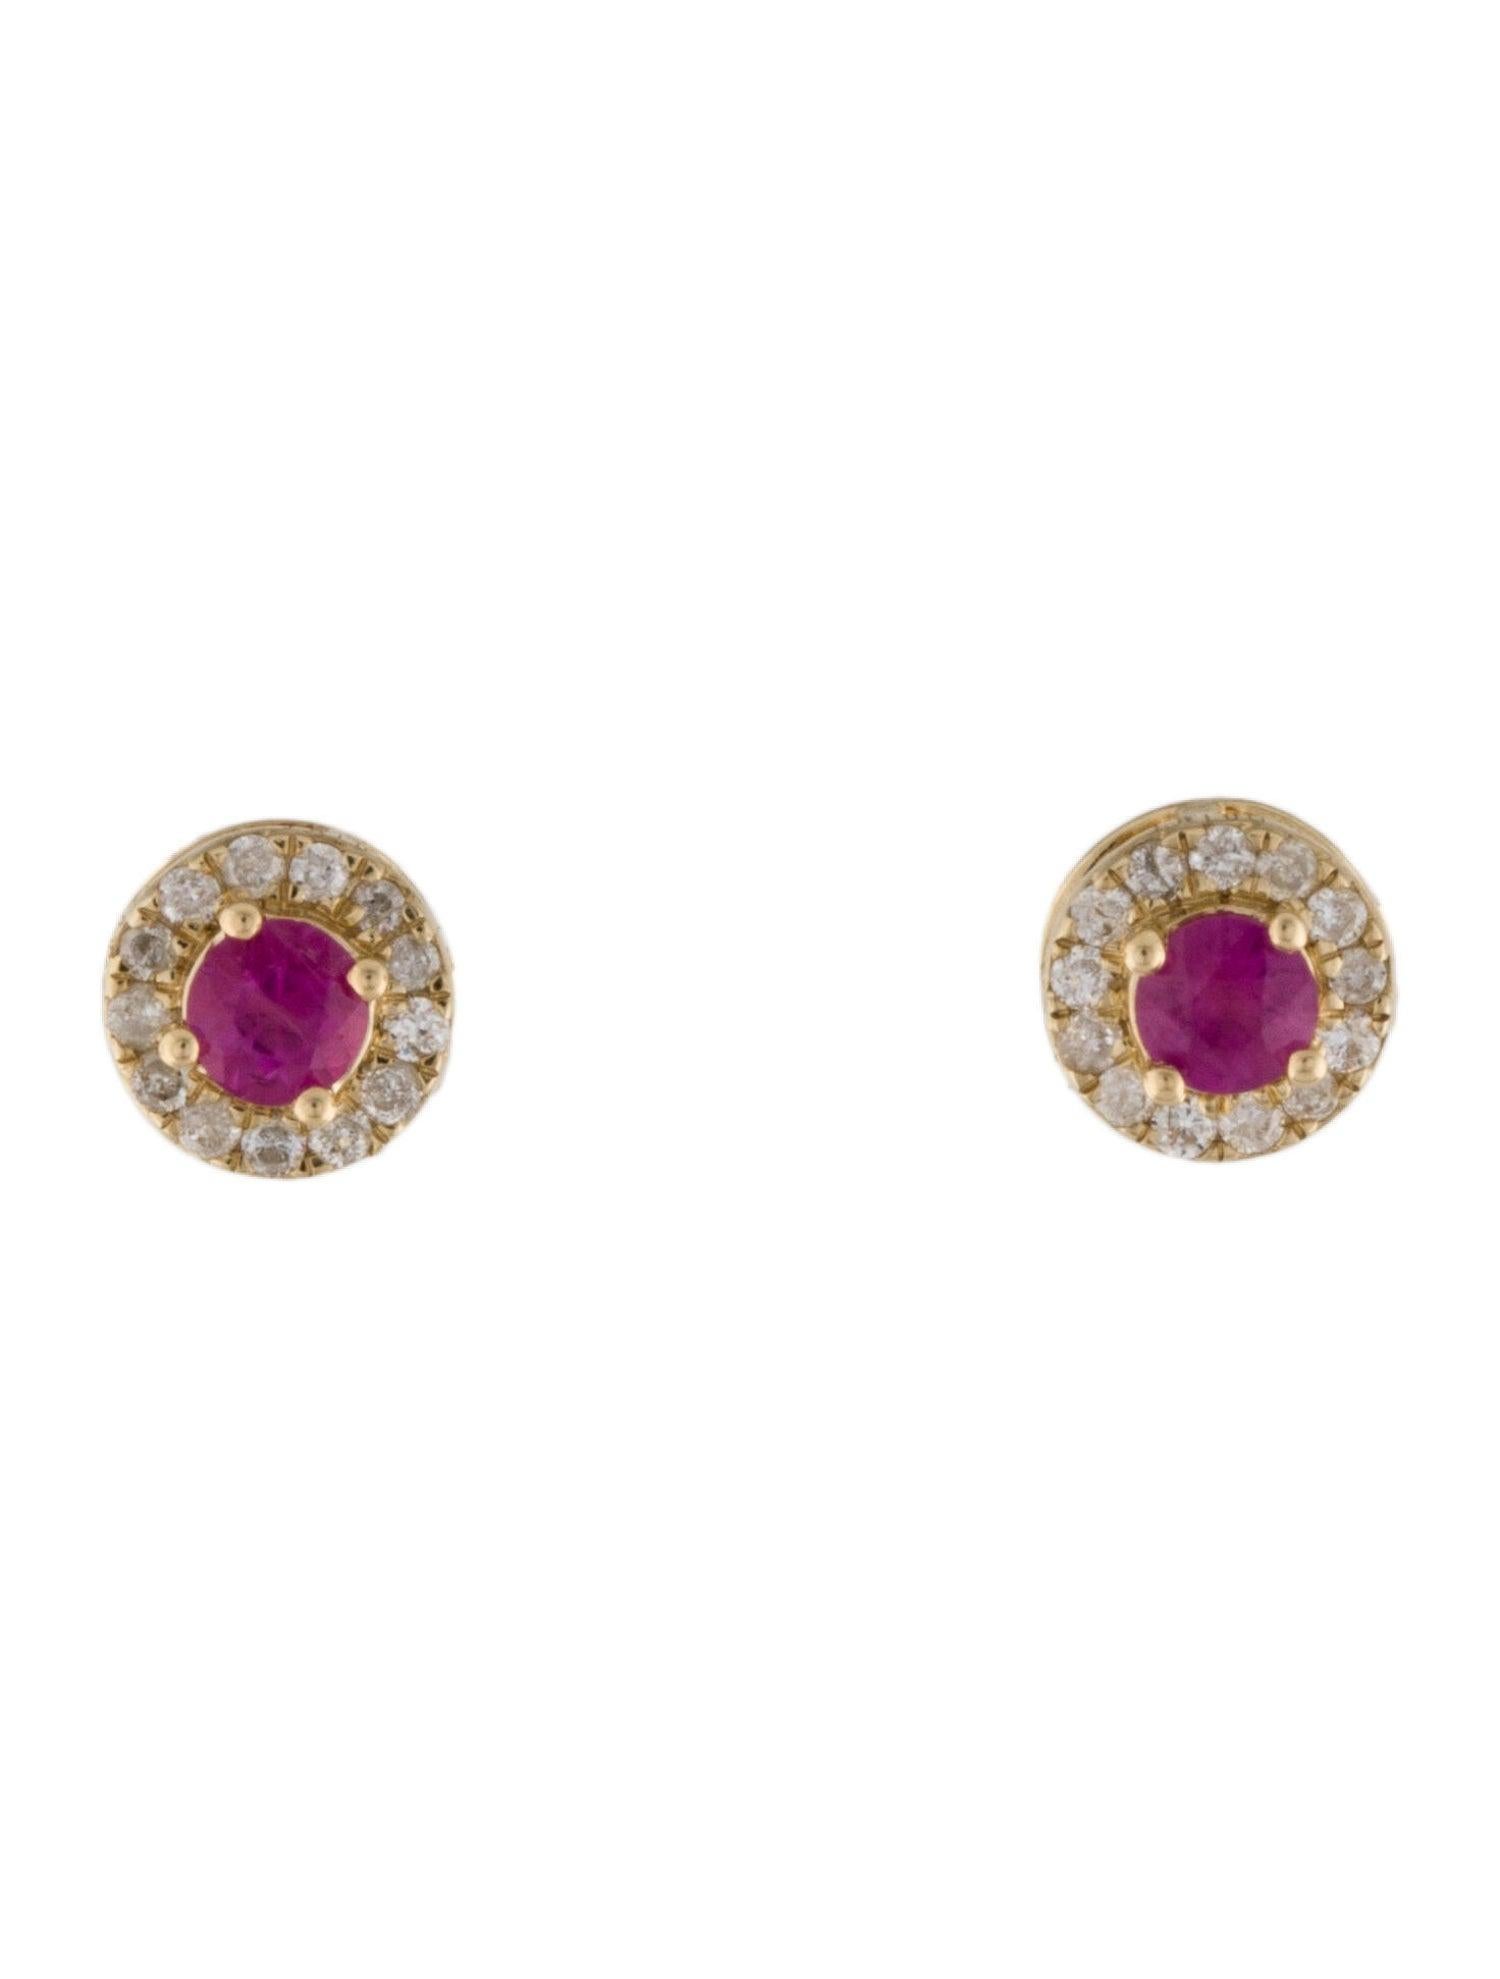 Embrace the fiery allure of passion with our Blooms of Passion Ruby and Diamond Earrings. Crafted with precision and love in the heart of India, these exquisite earrings are a testament to Jeweltique's commitment to quality and craftsmanship.

Set